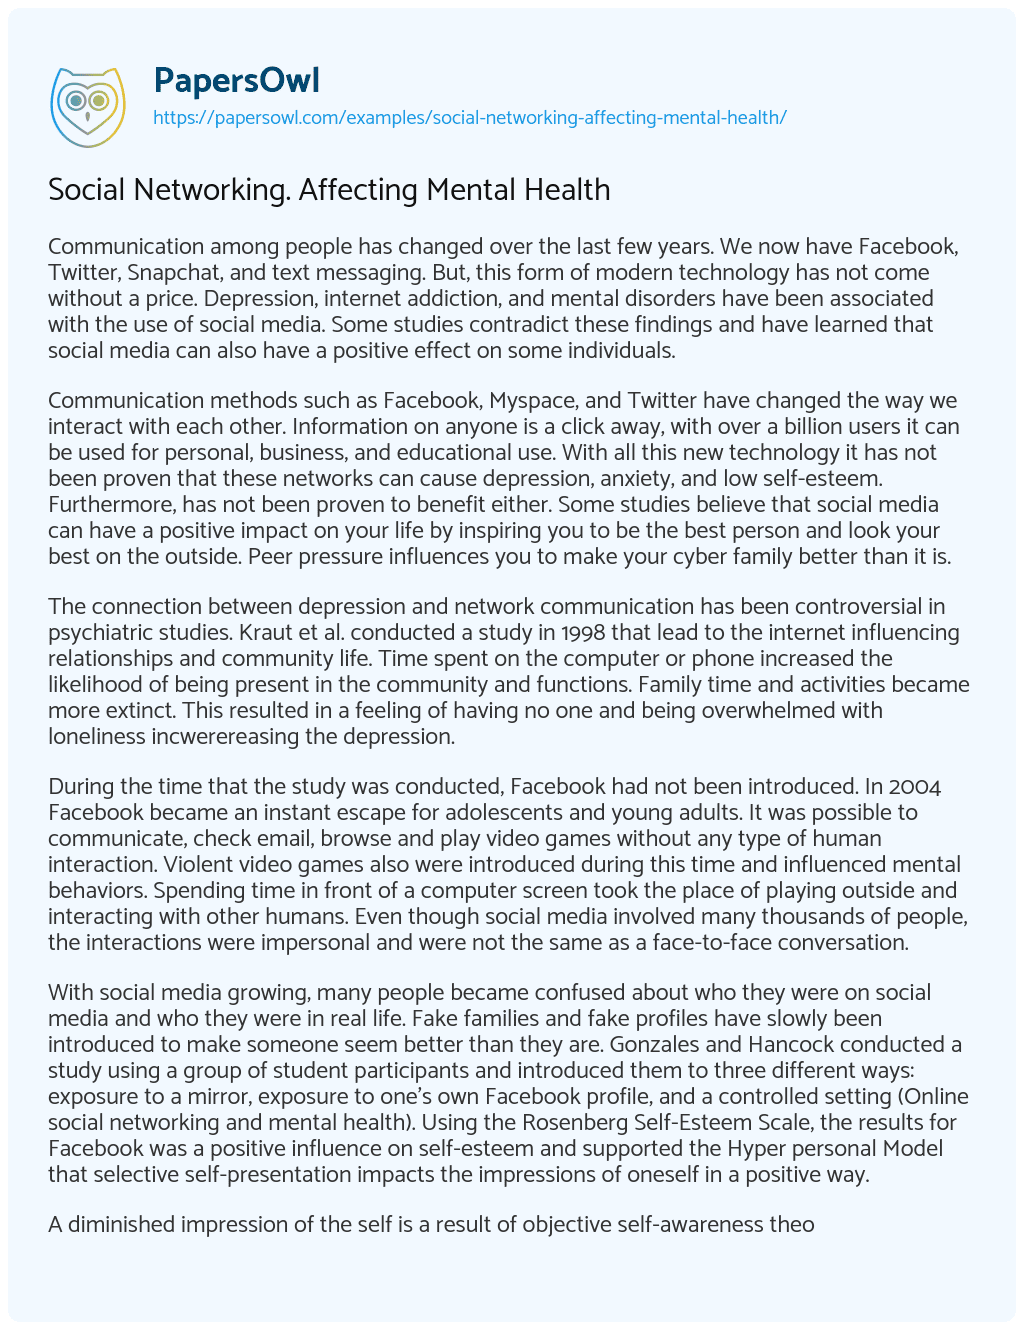 Essay on Social Networking. Affecting Mental Health